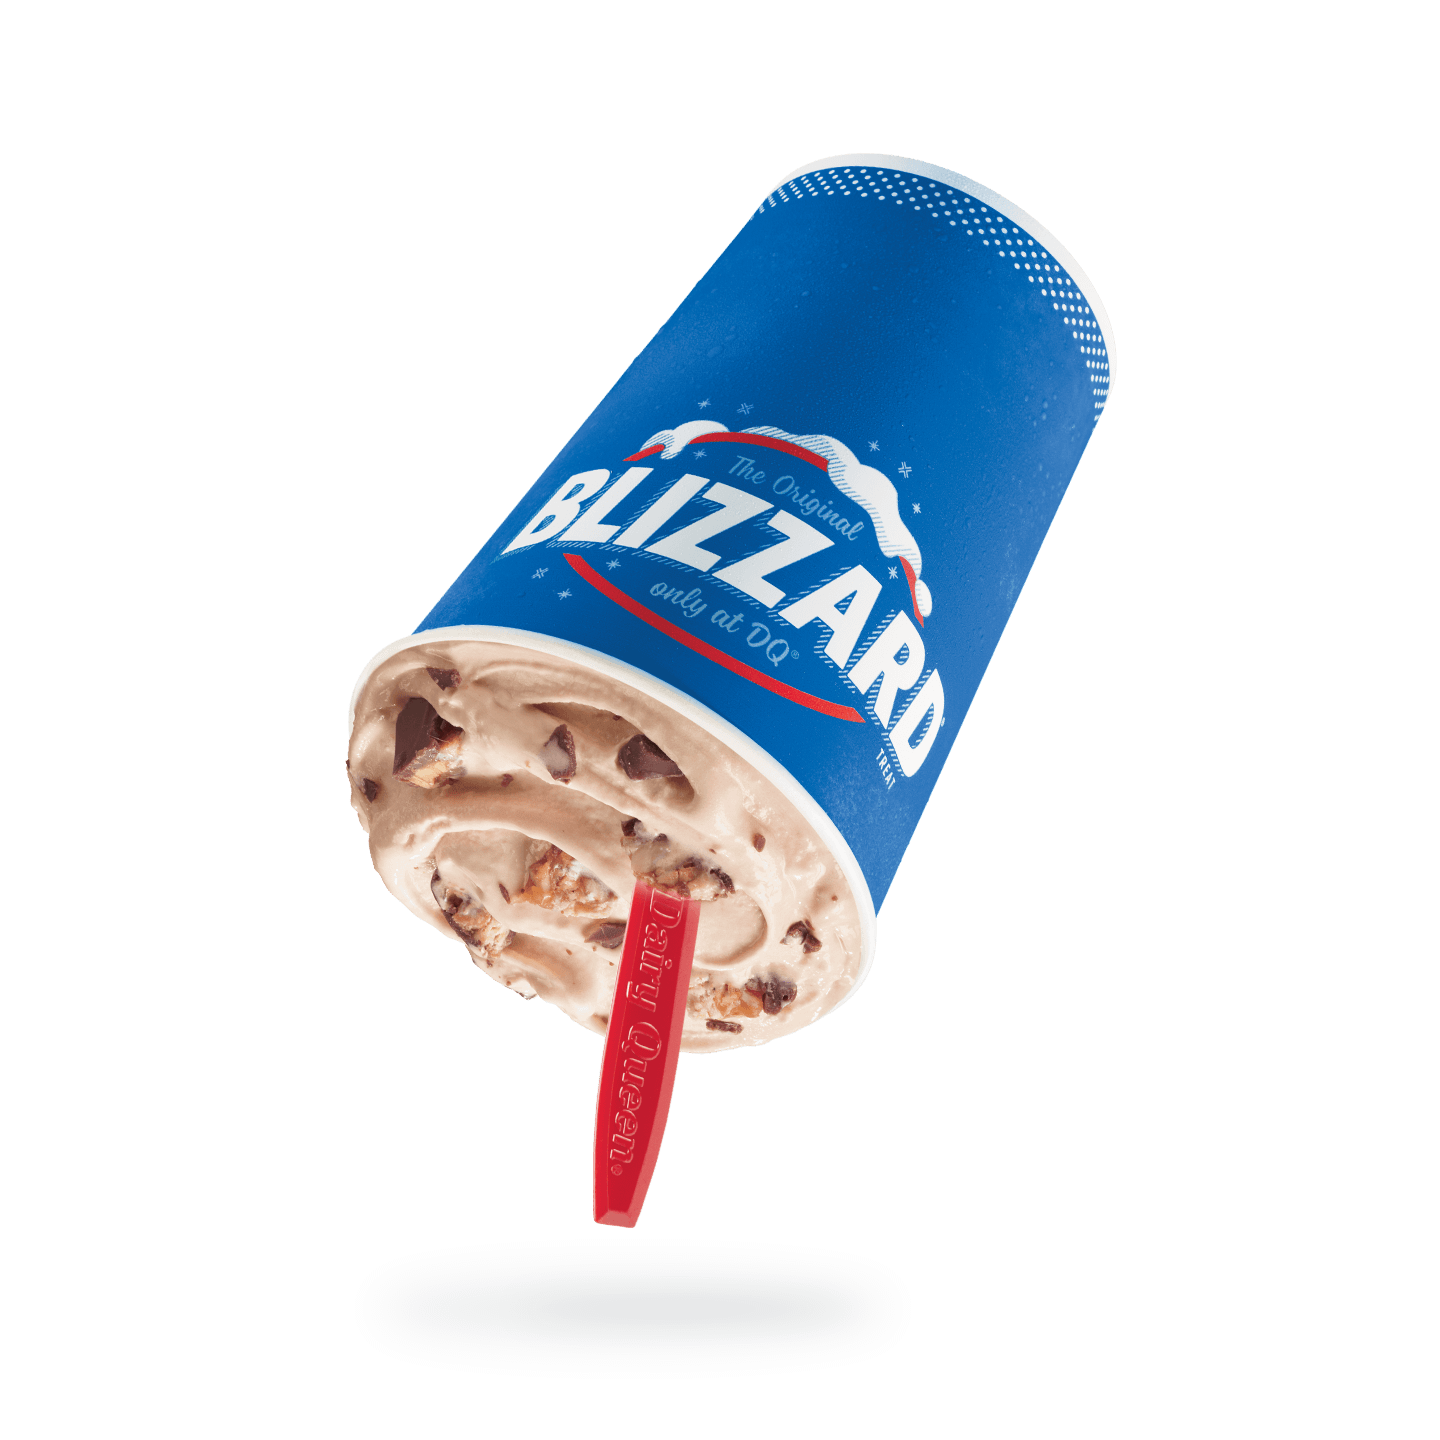 Snickers Brownie Blizzard